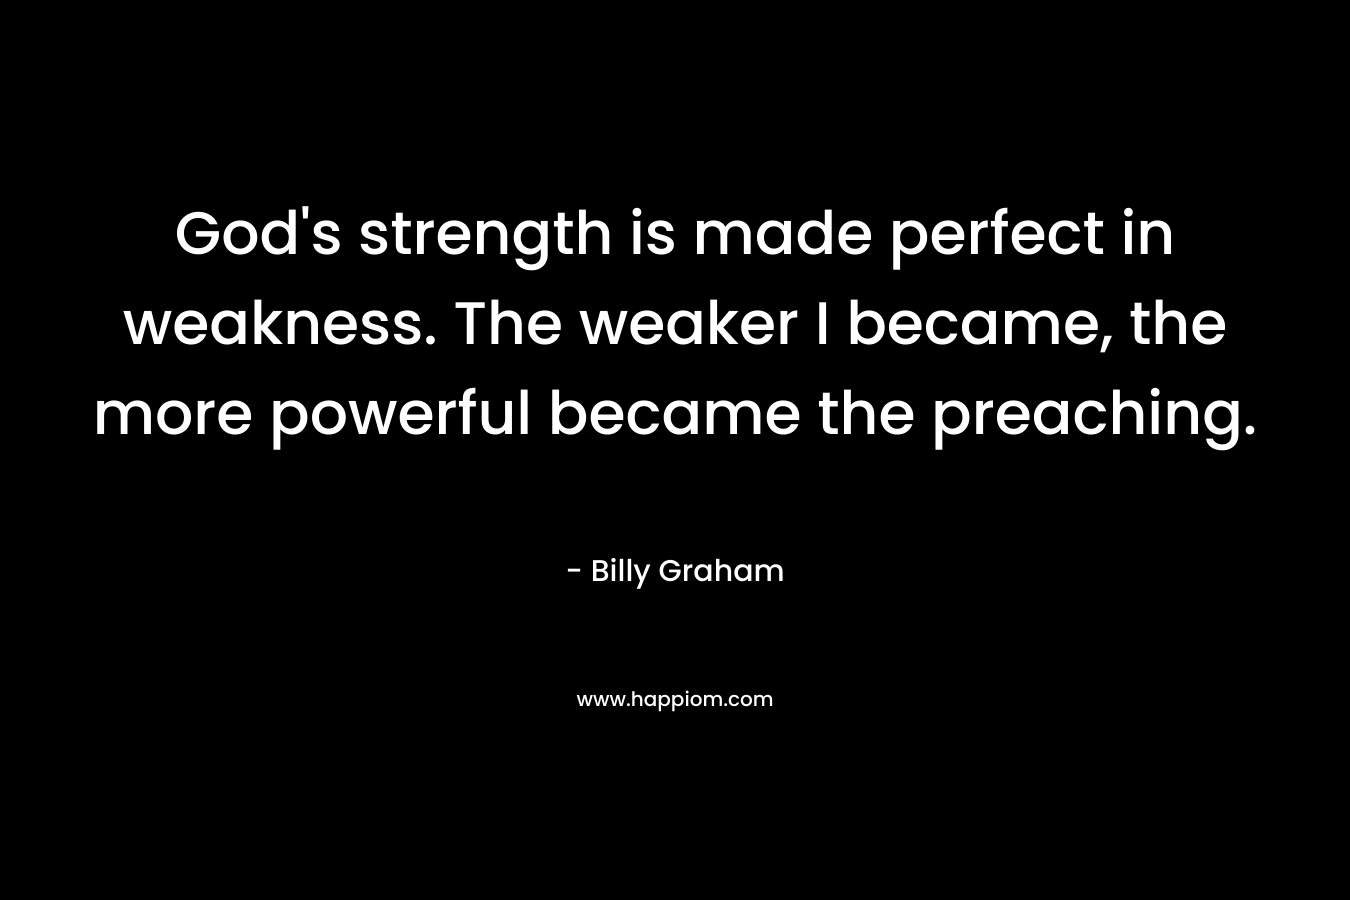 God's strength is made perfect in weakness. The weaker I became, the more powerful became the preaching.